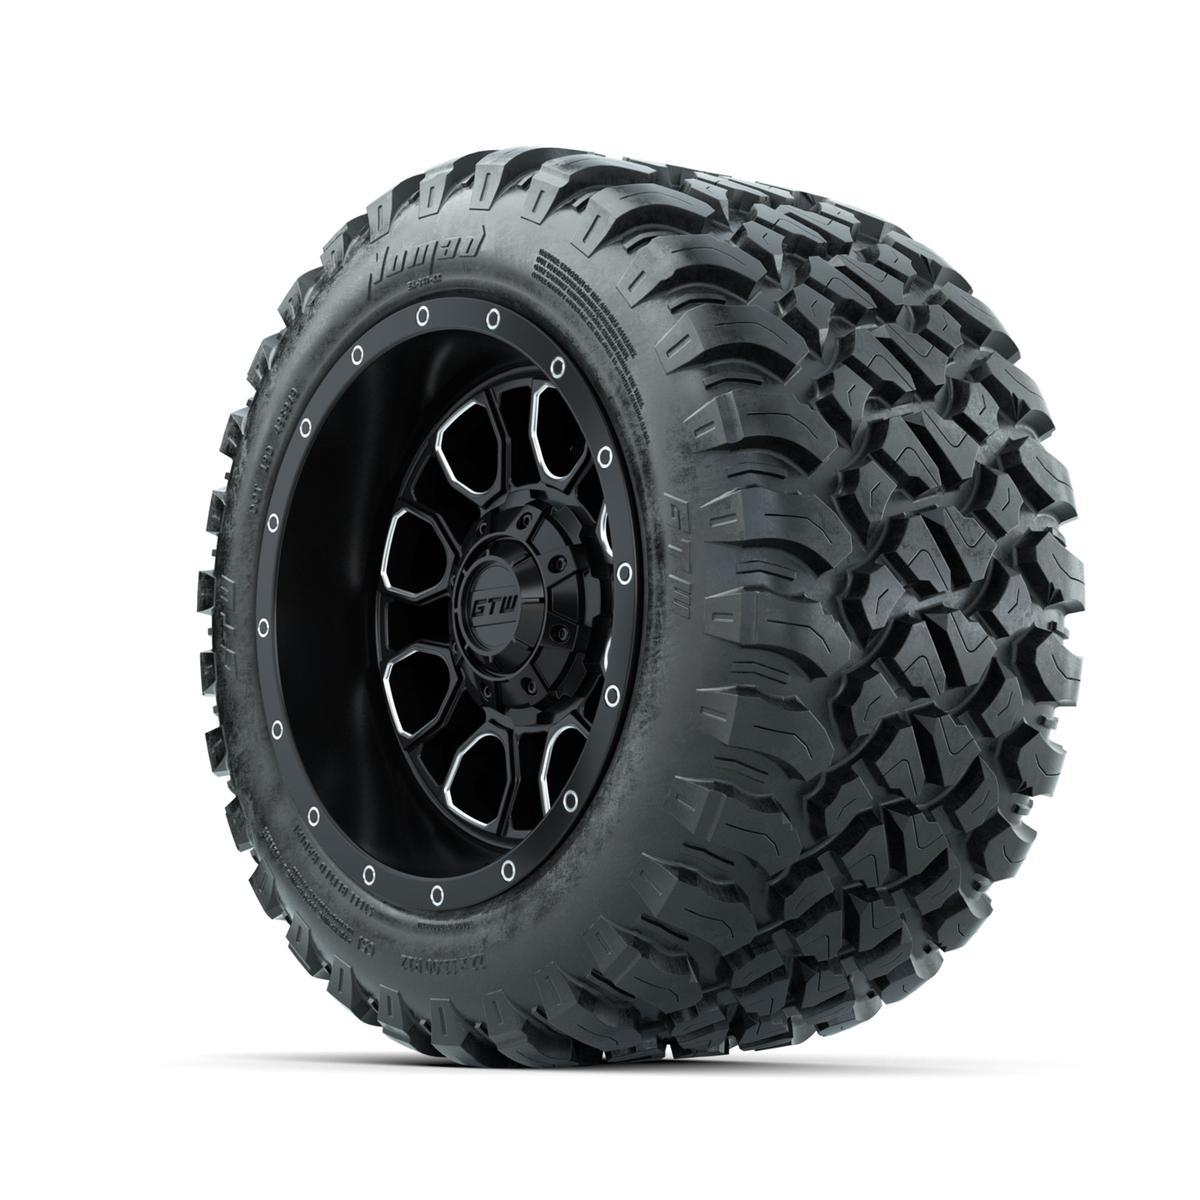 Set of (4) 12 in GTW® Volt Machined & Black Wheels with 22x11-R12 Nomad All-Terrain Tires